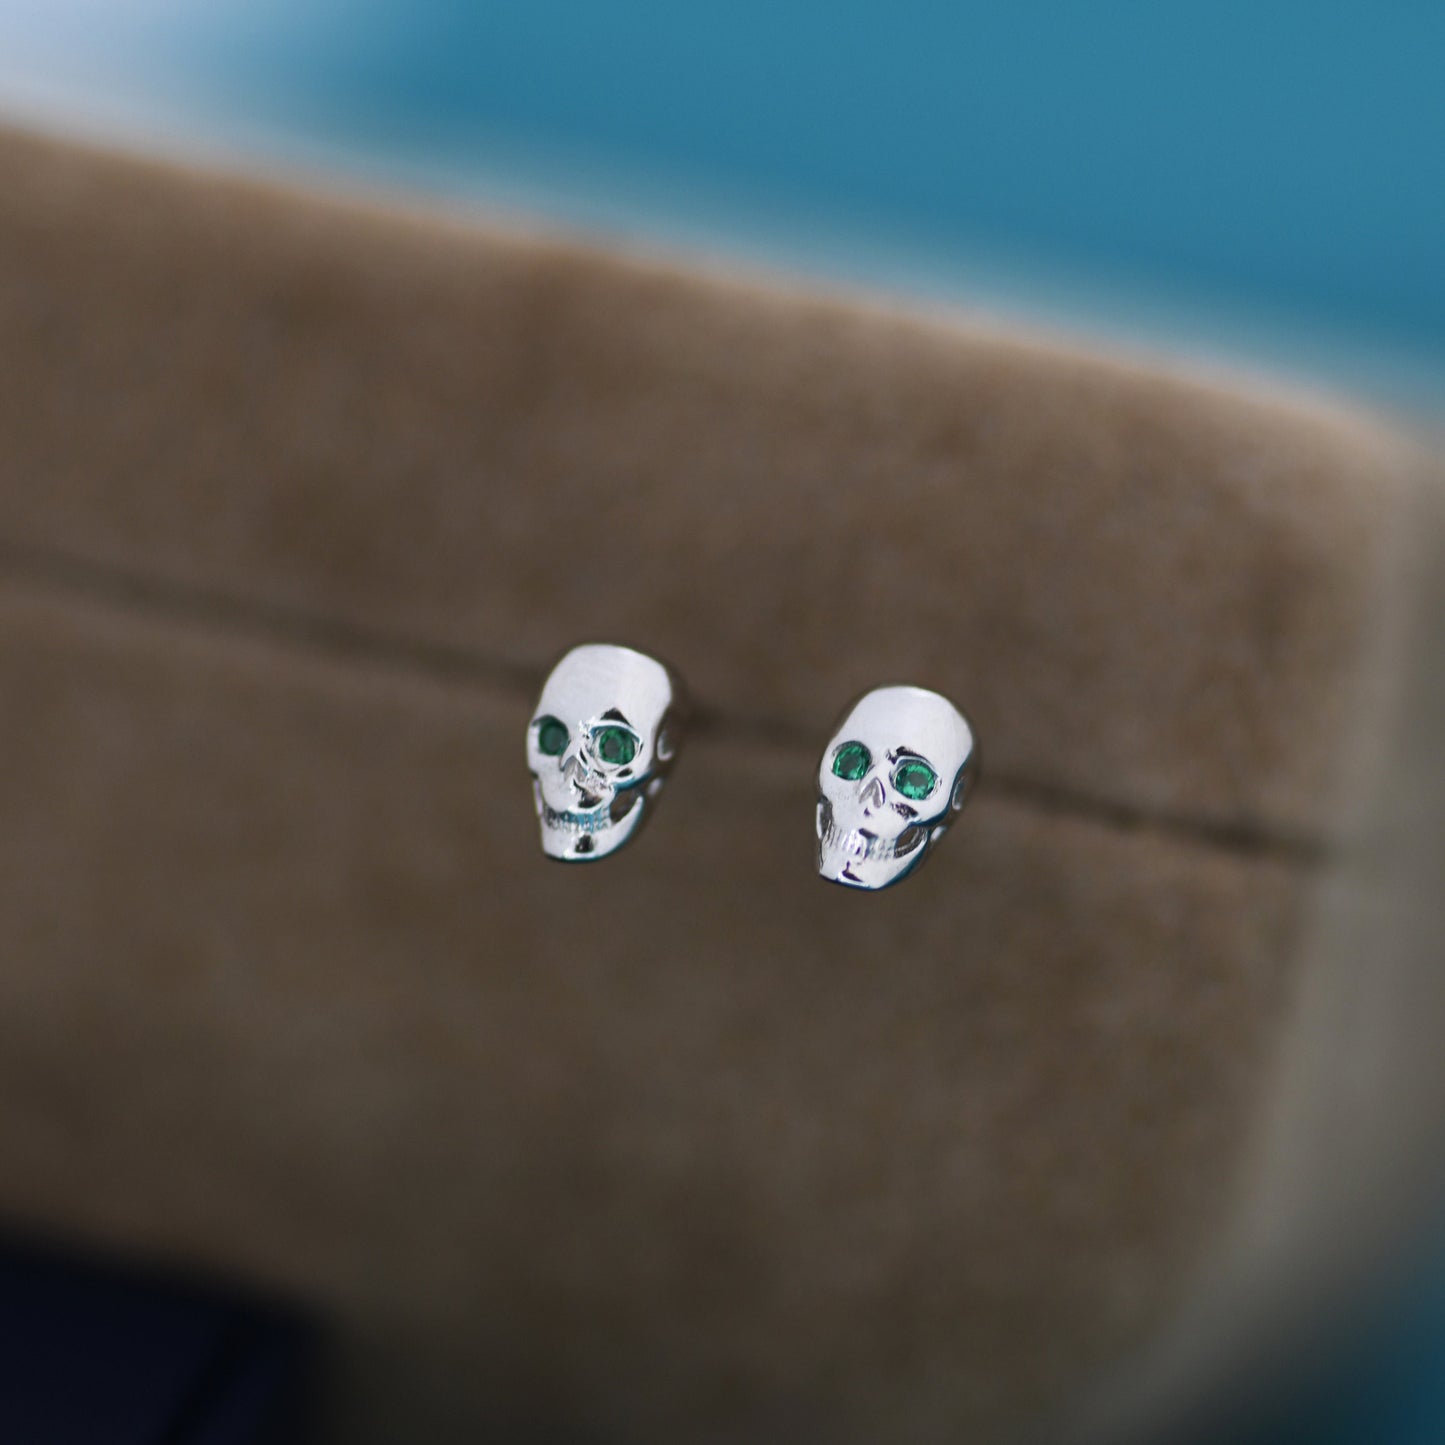 Extra Tiny Skull Screw Back Earrings in Sterling Silver with Emerald Green CZ - Gold or Silver - Skull Earrings - Petite Screwback Barbell